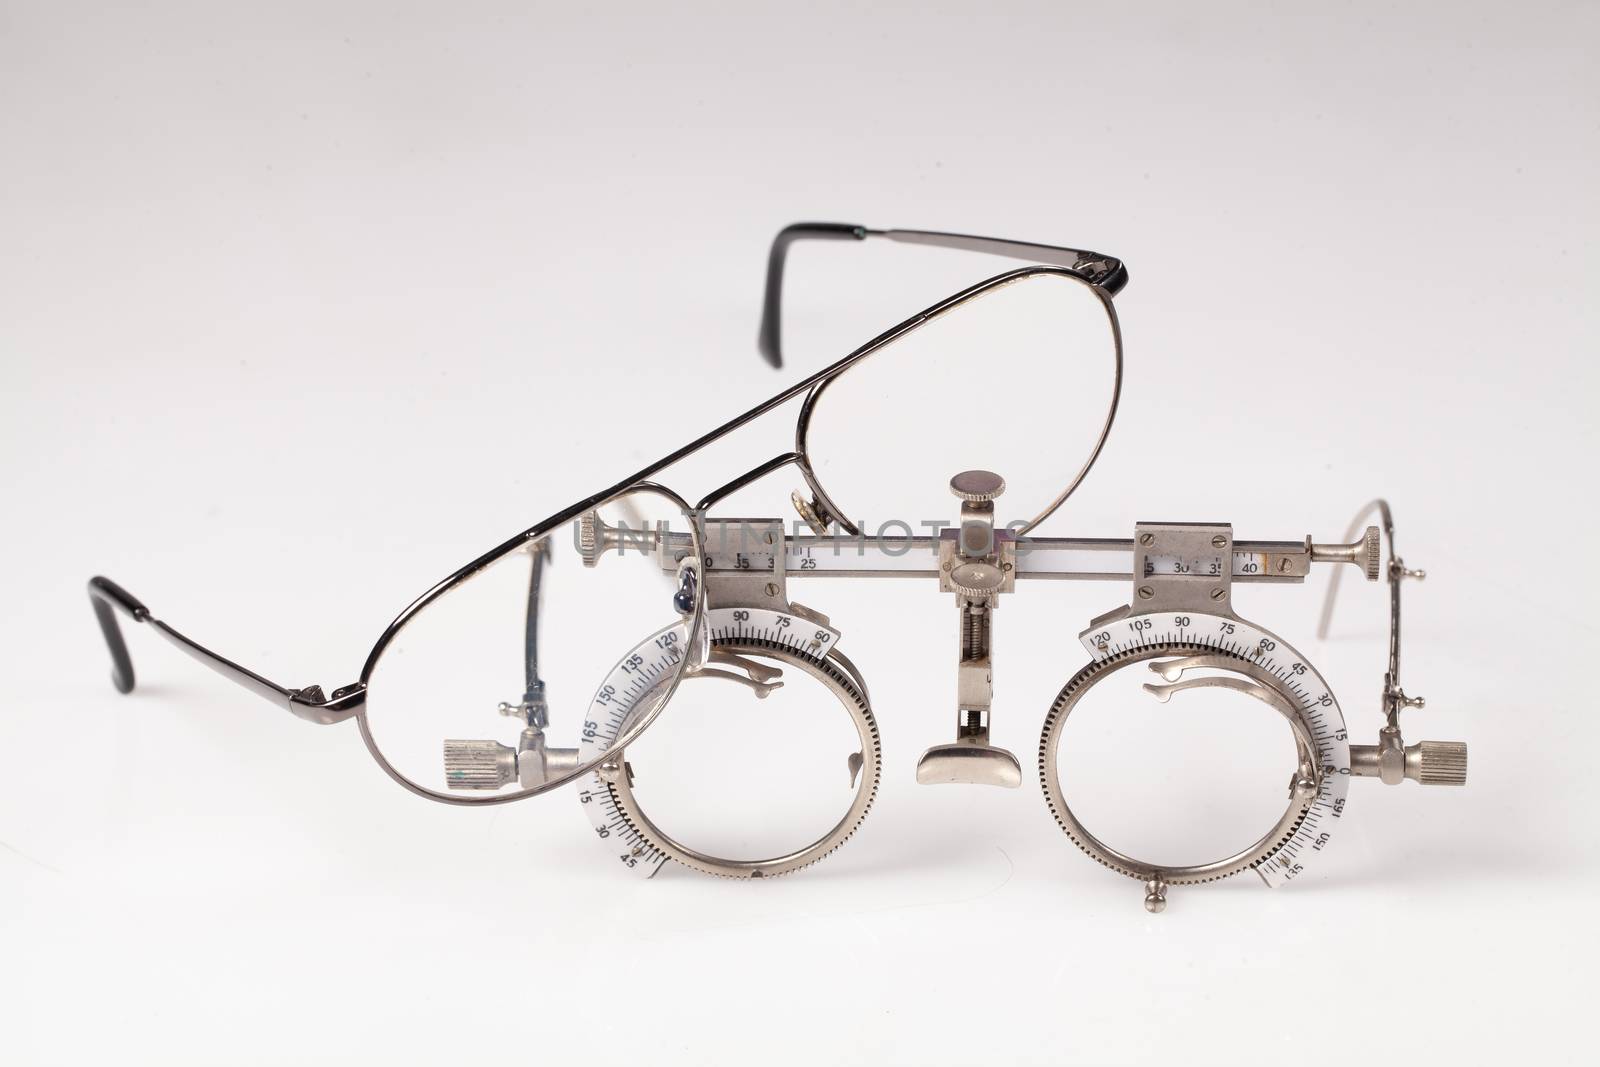 Optometric Device To Match Lenses by Fotoskat